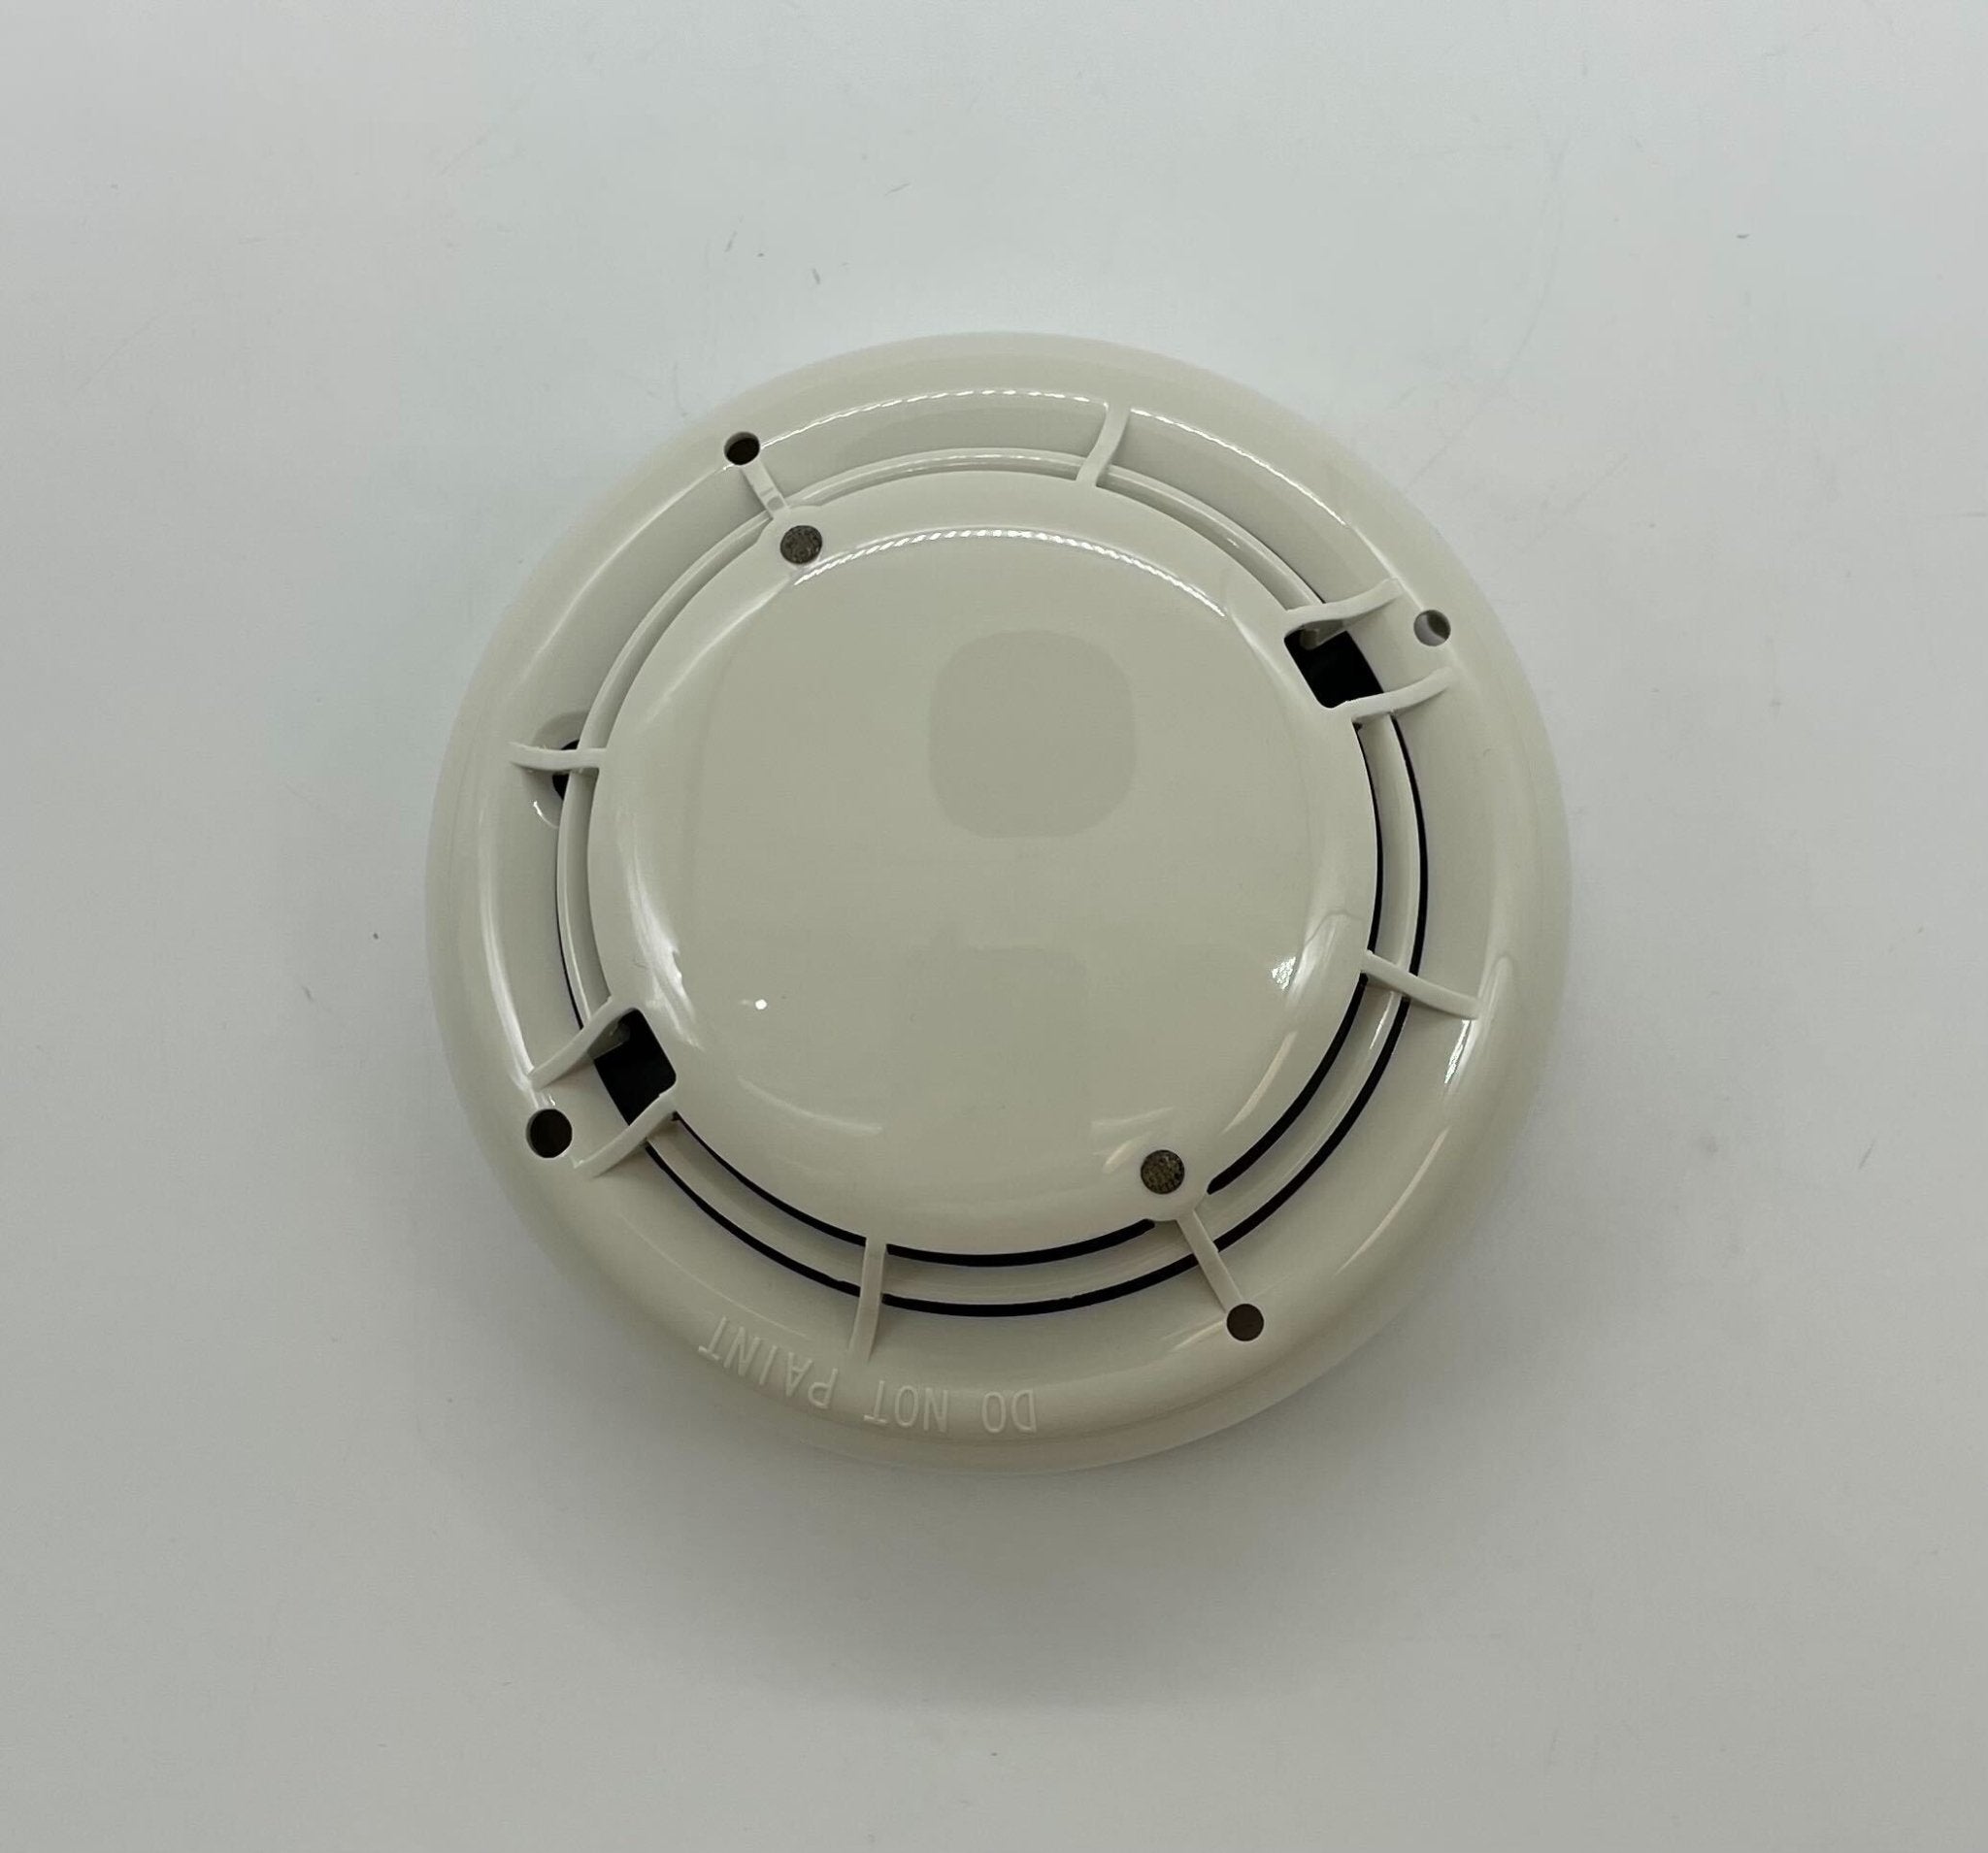 Silent Knight SD505-PHOTO Addressable Photoelectric Smoke Detector - The Fire Alarm Supplier